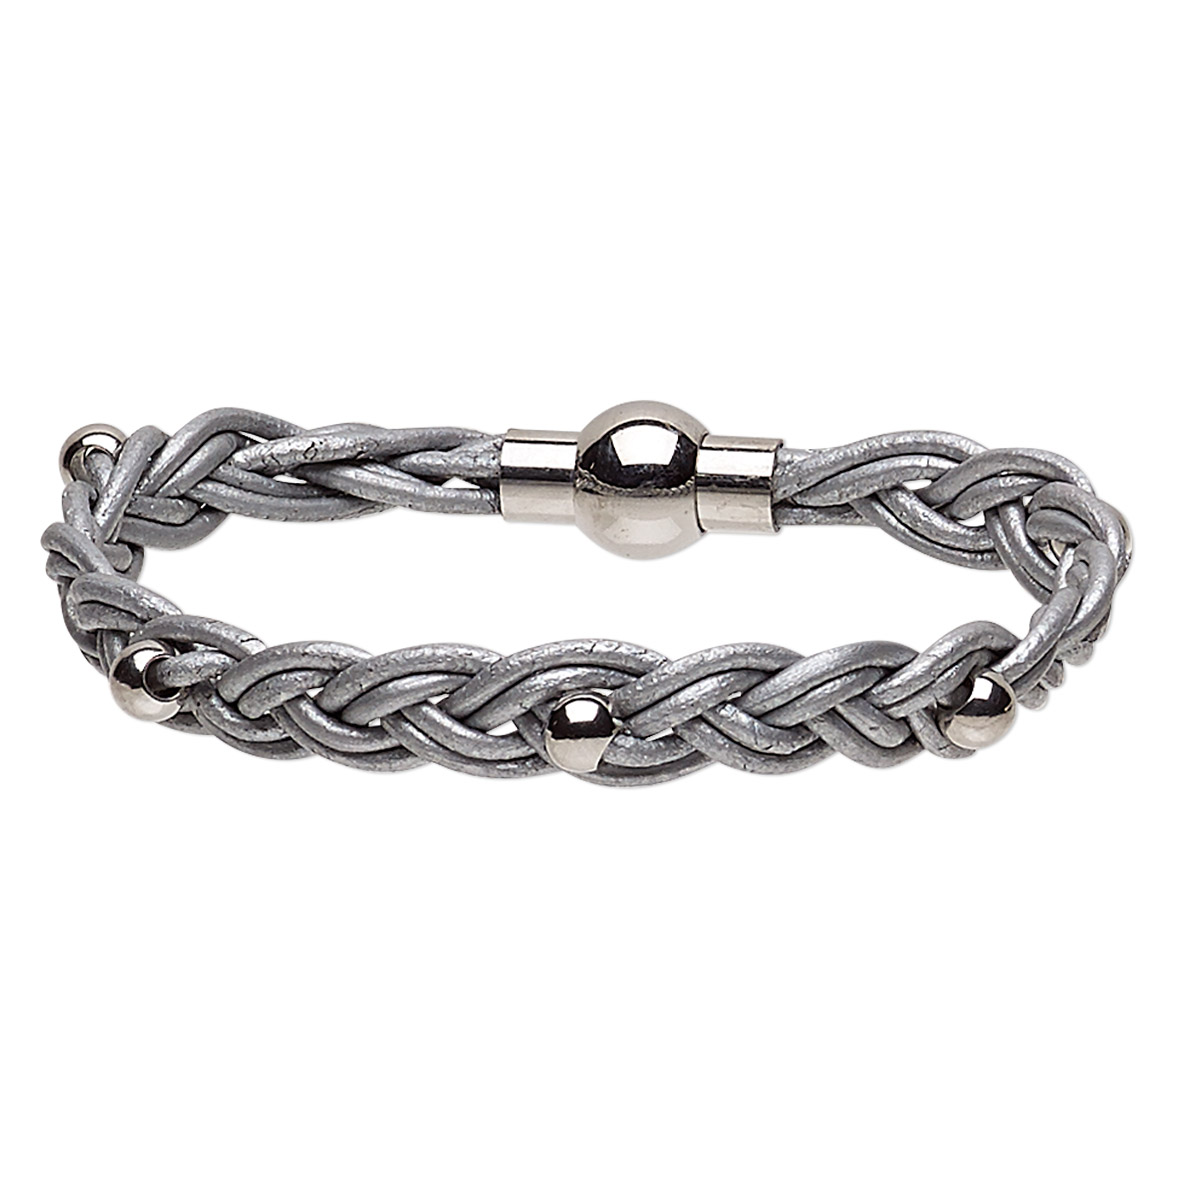 Bracelet, leather (dyed) and stainless steel, silver, 11mm wide braided ...